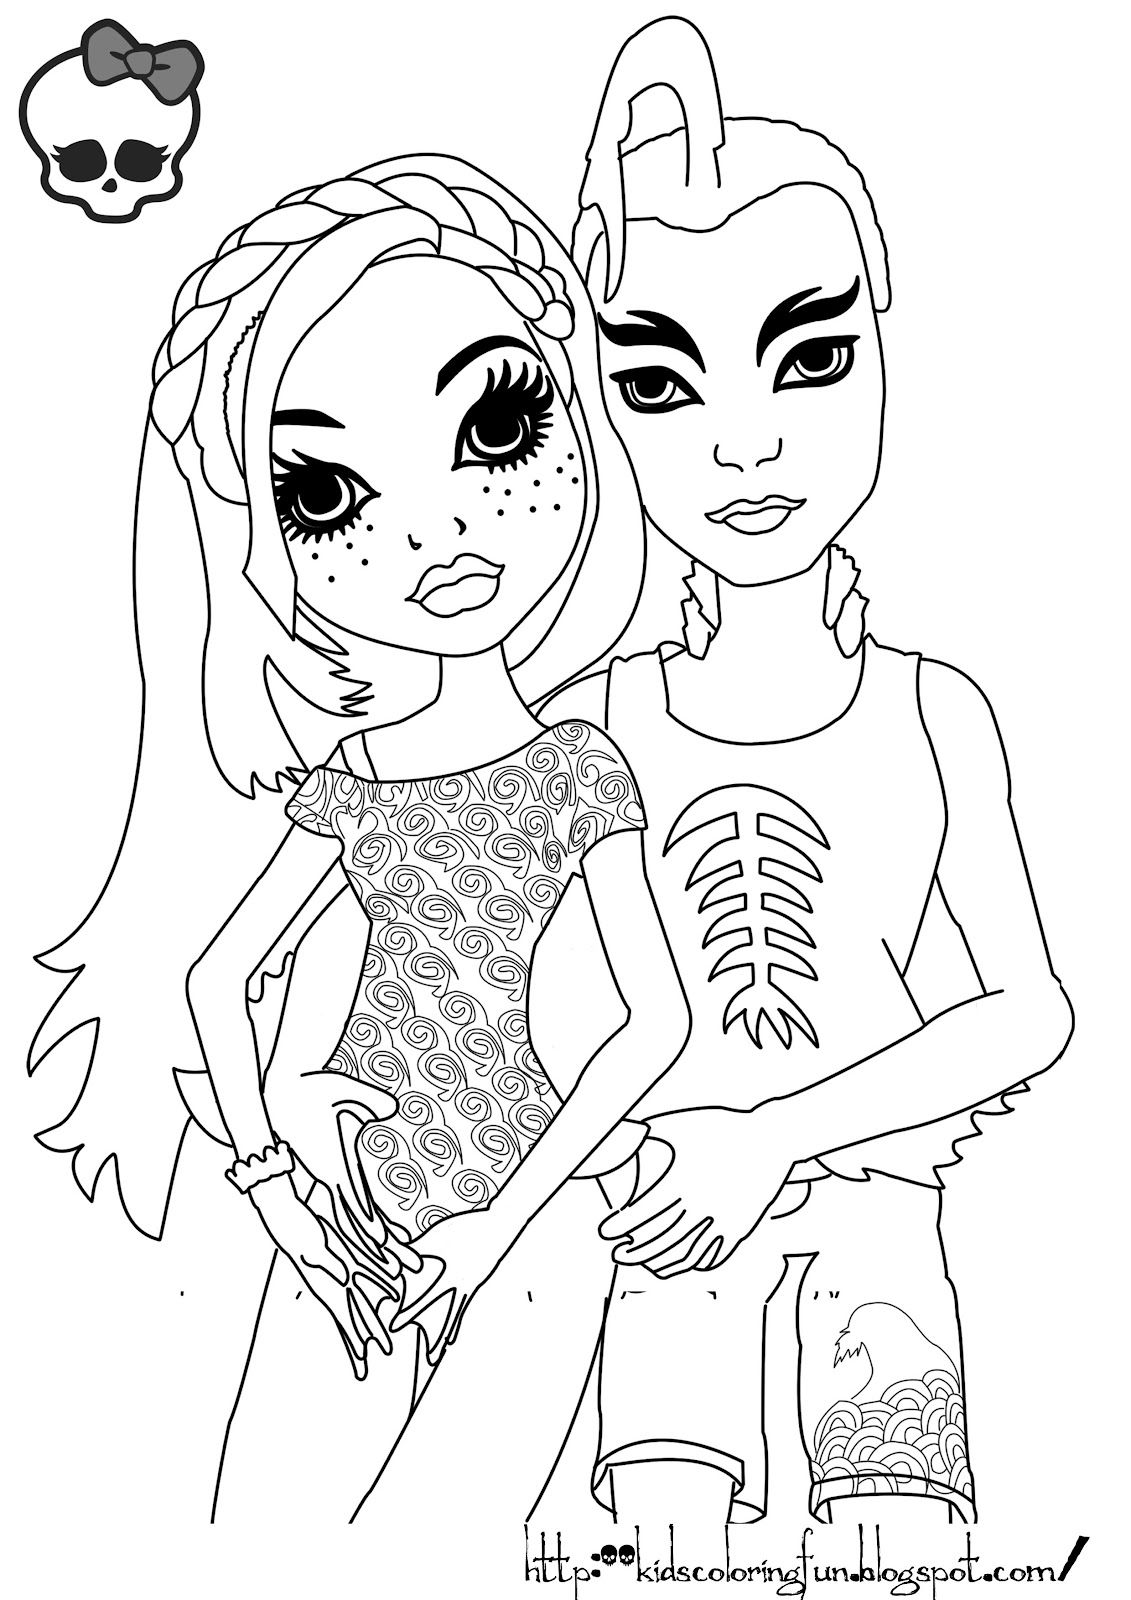  Couple Monster High coloring pages.jpg